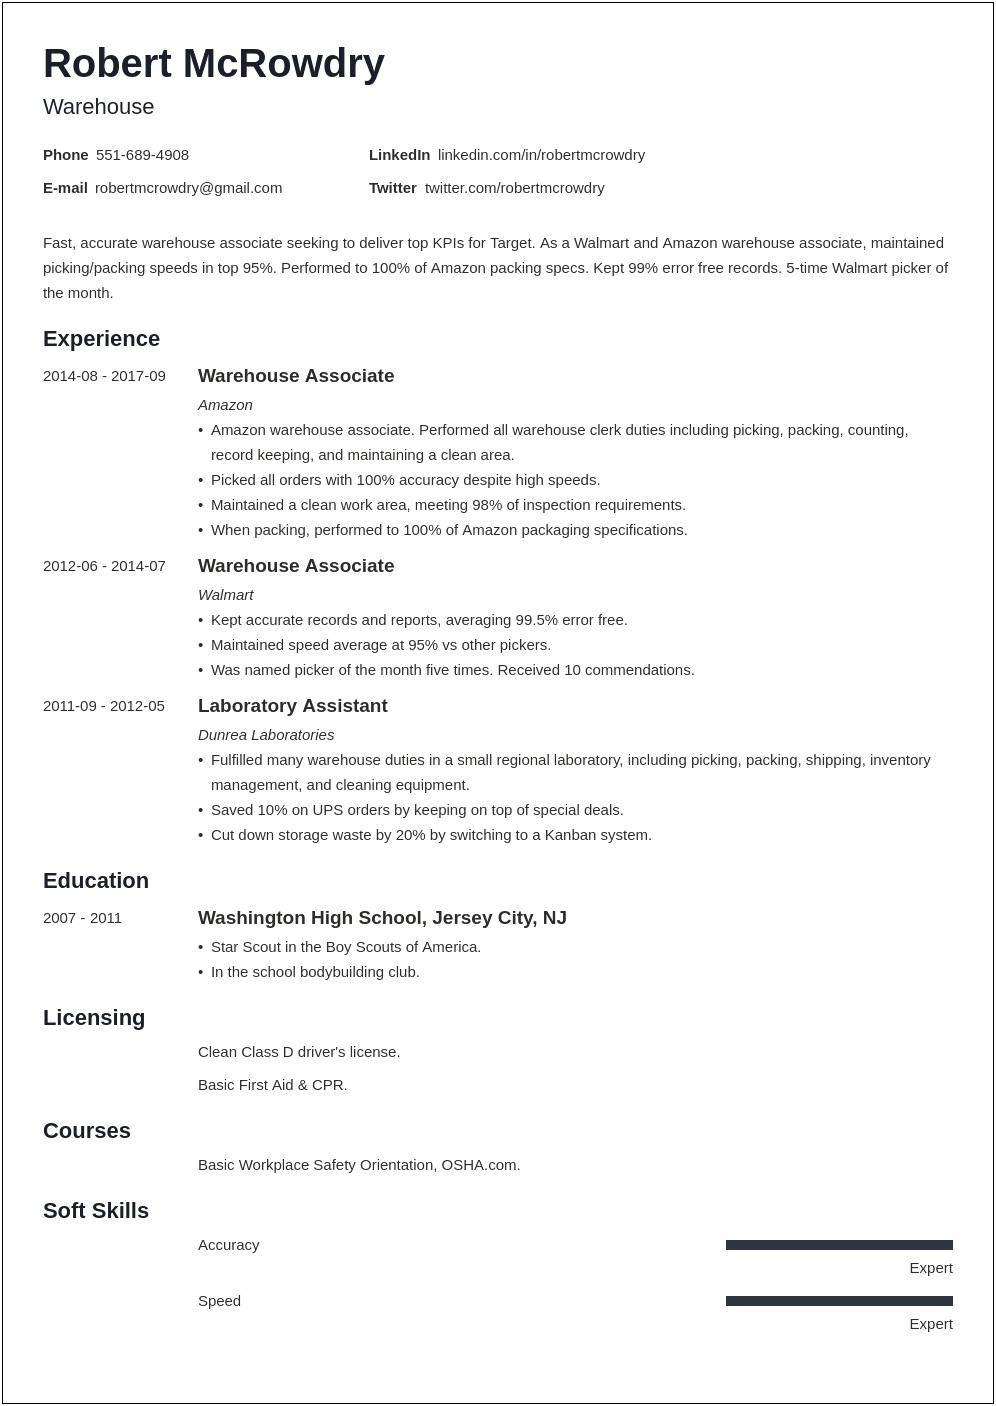 Warehouse Line Worker Skills For A Resume